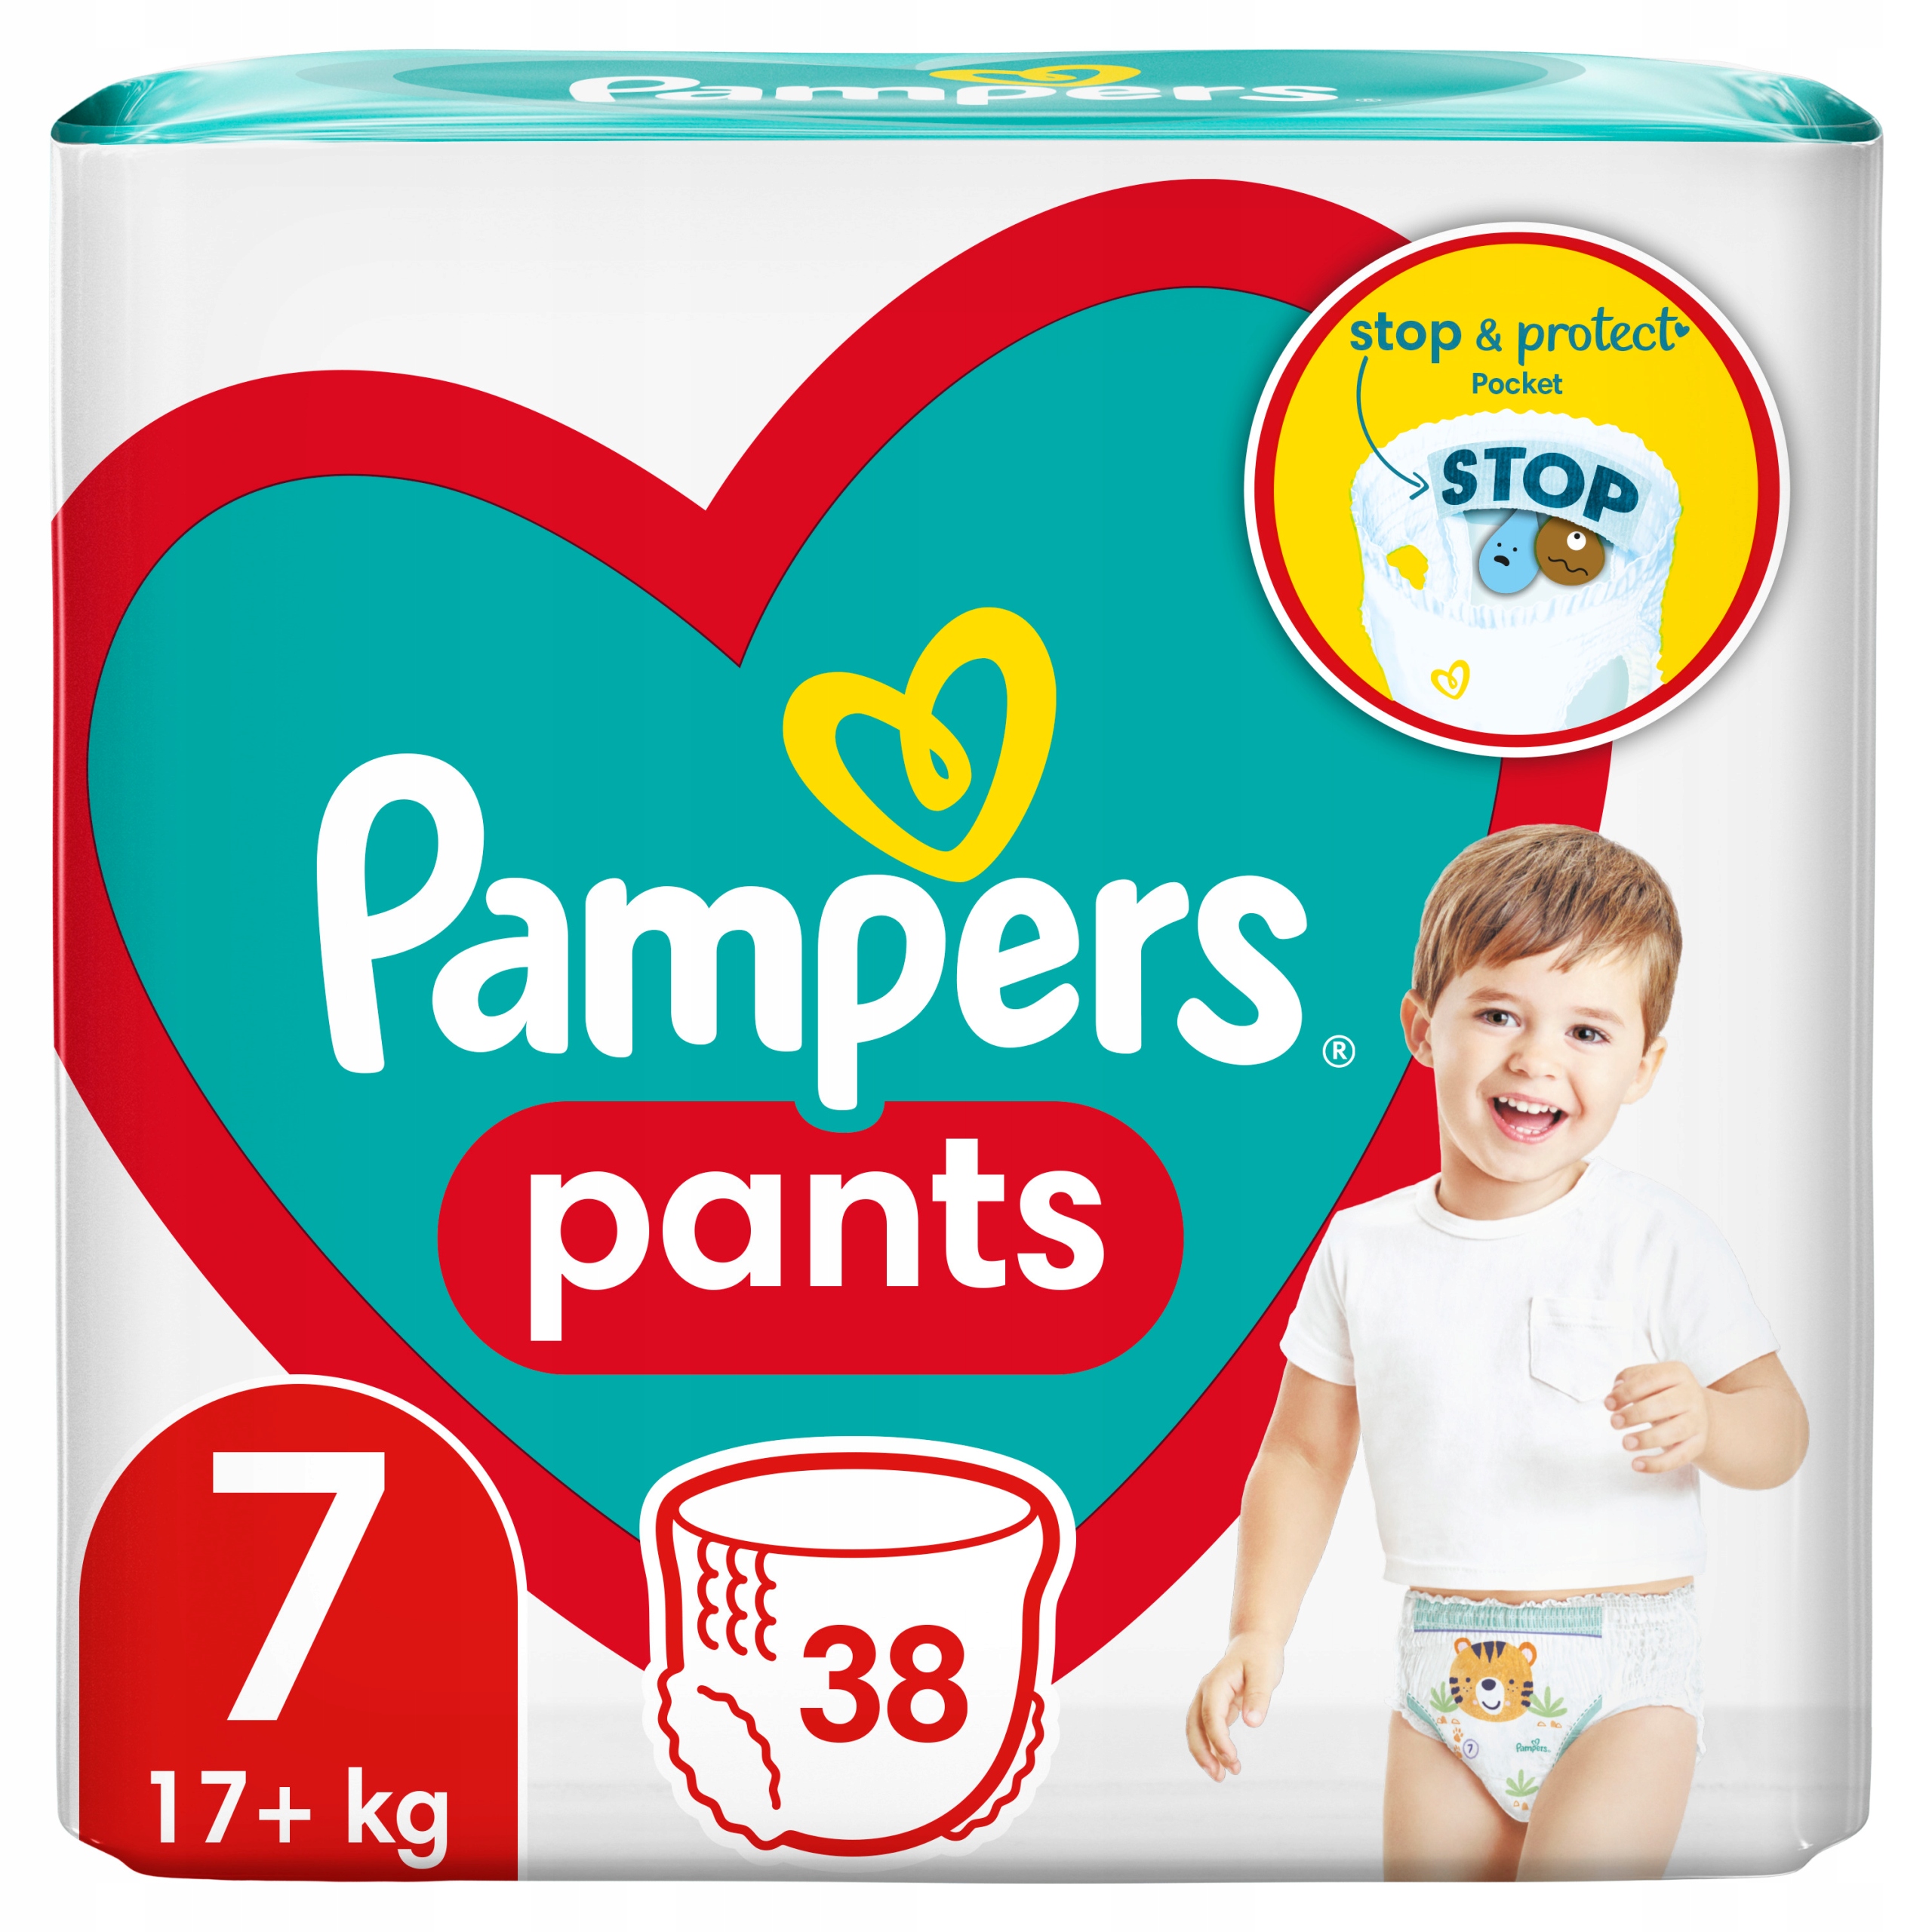 pampers new baby size 0 carry pack 24